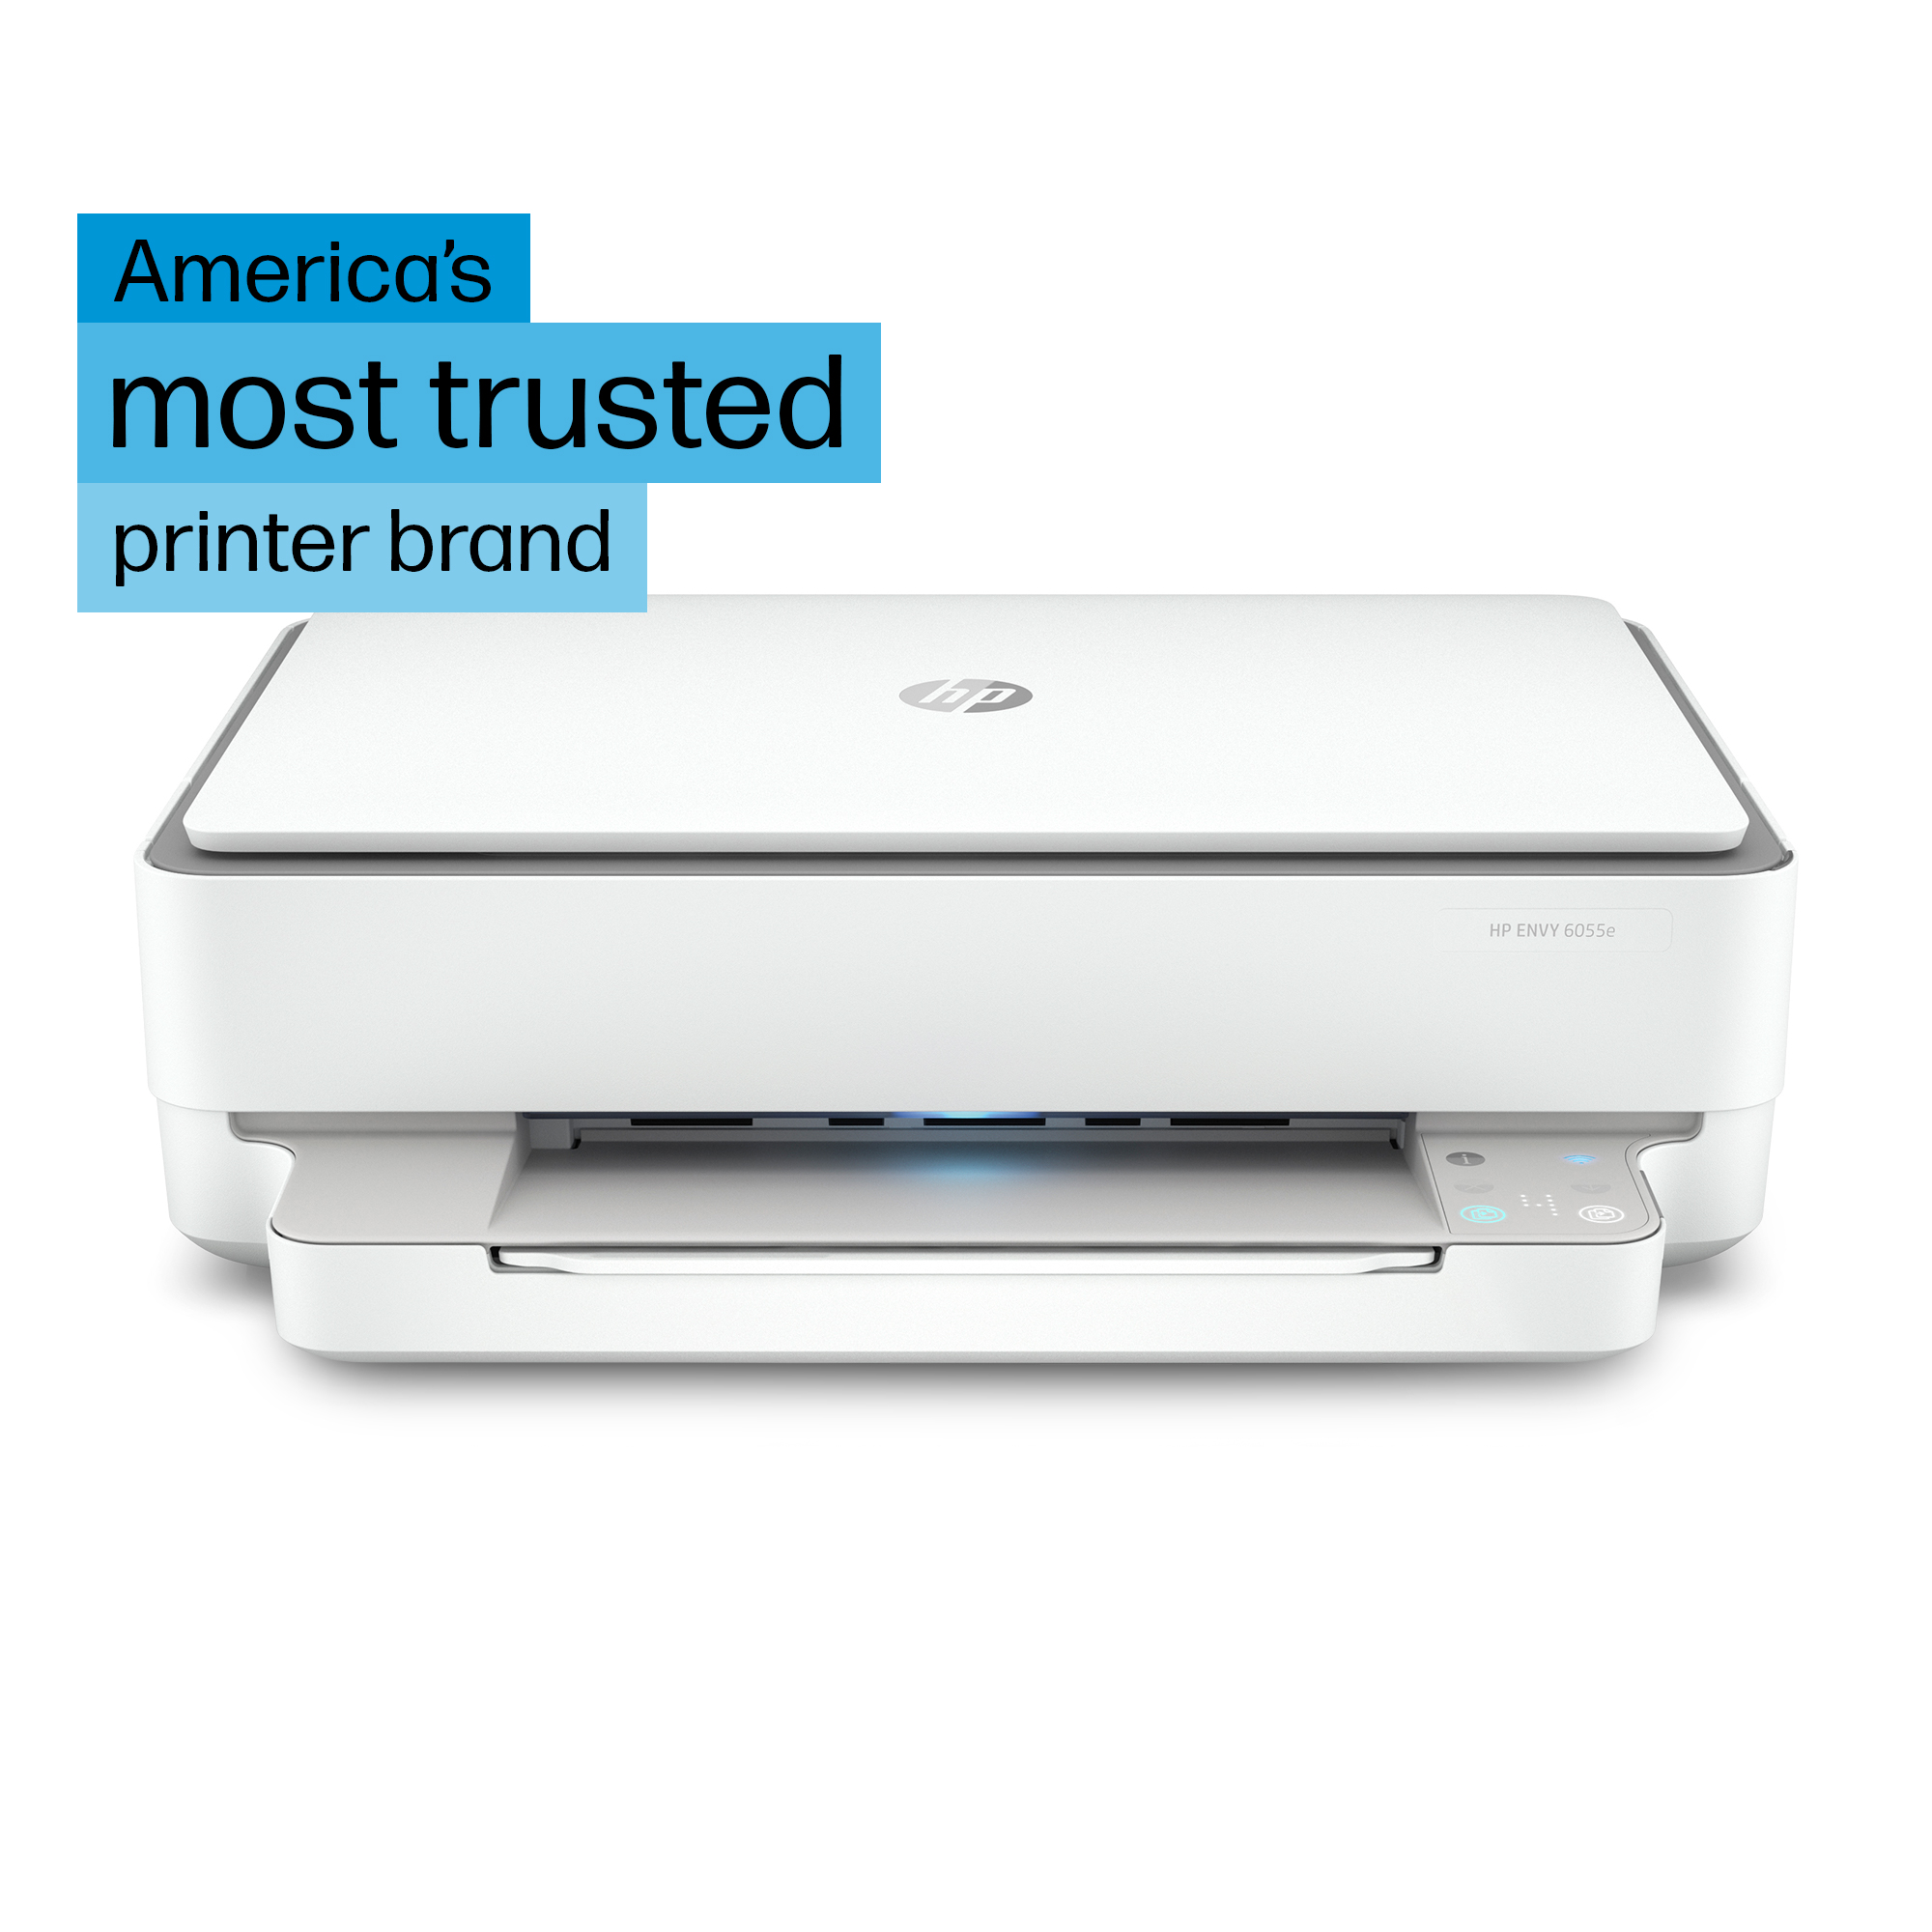 HP ENVY 6055e All-in-One Wireless Color Inkjet Printer -  3 Months Free Instant Ink with HP+ - image 8 of 19